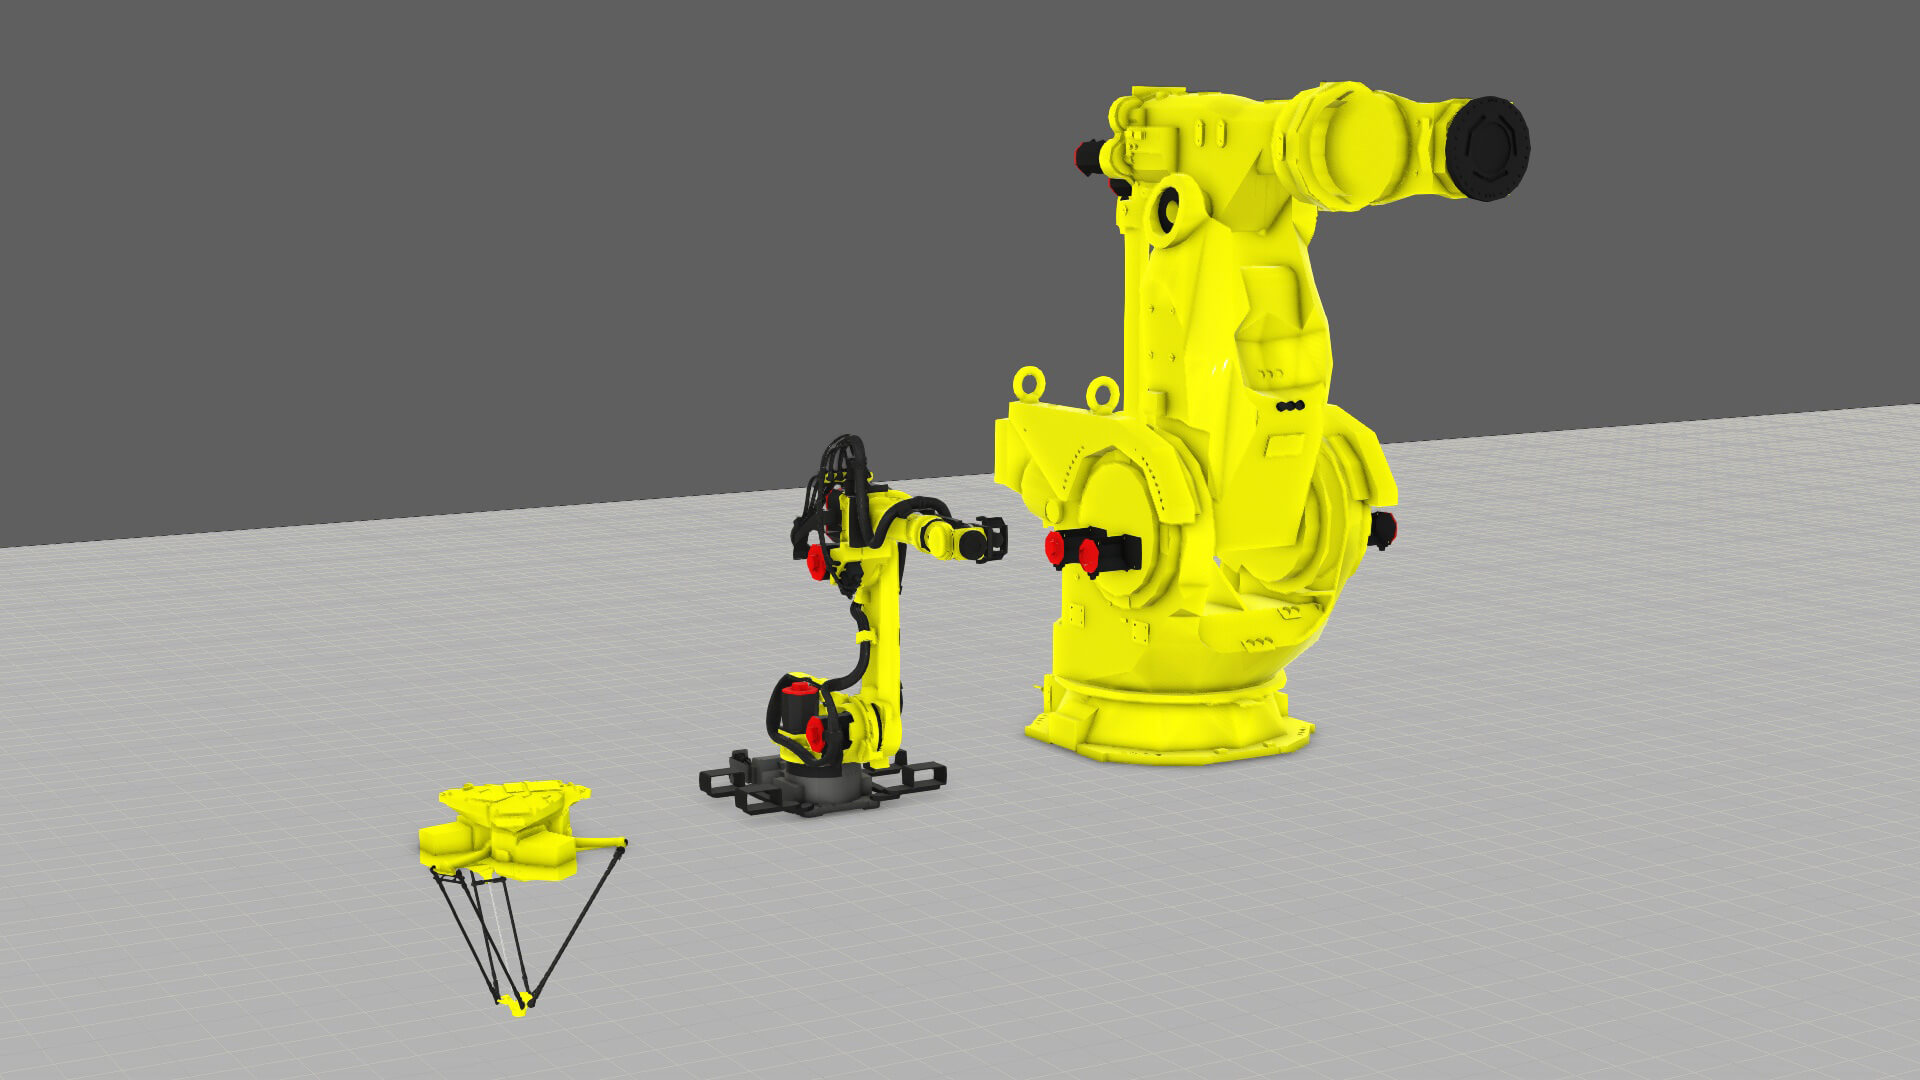 The new Fanuc component additions to Visual Components eCatalog in April 2019